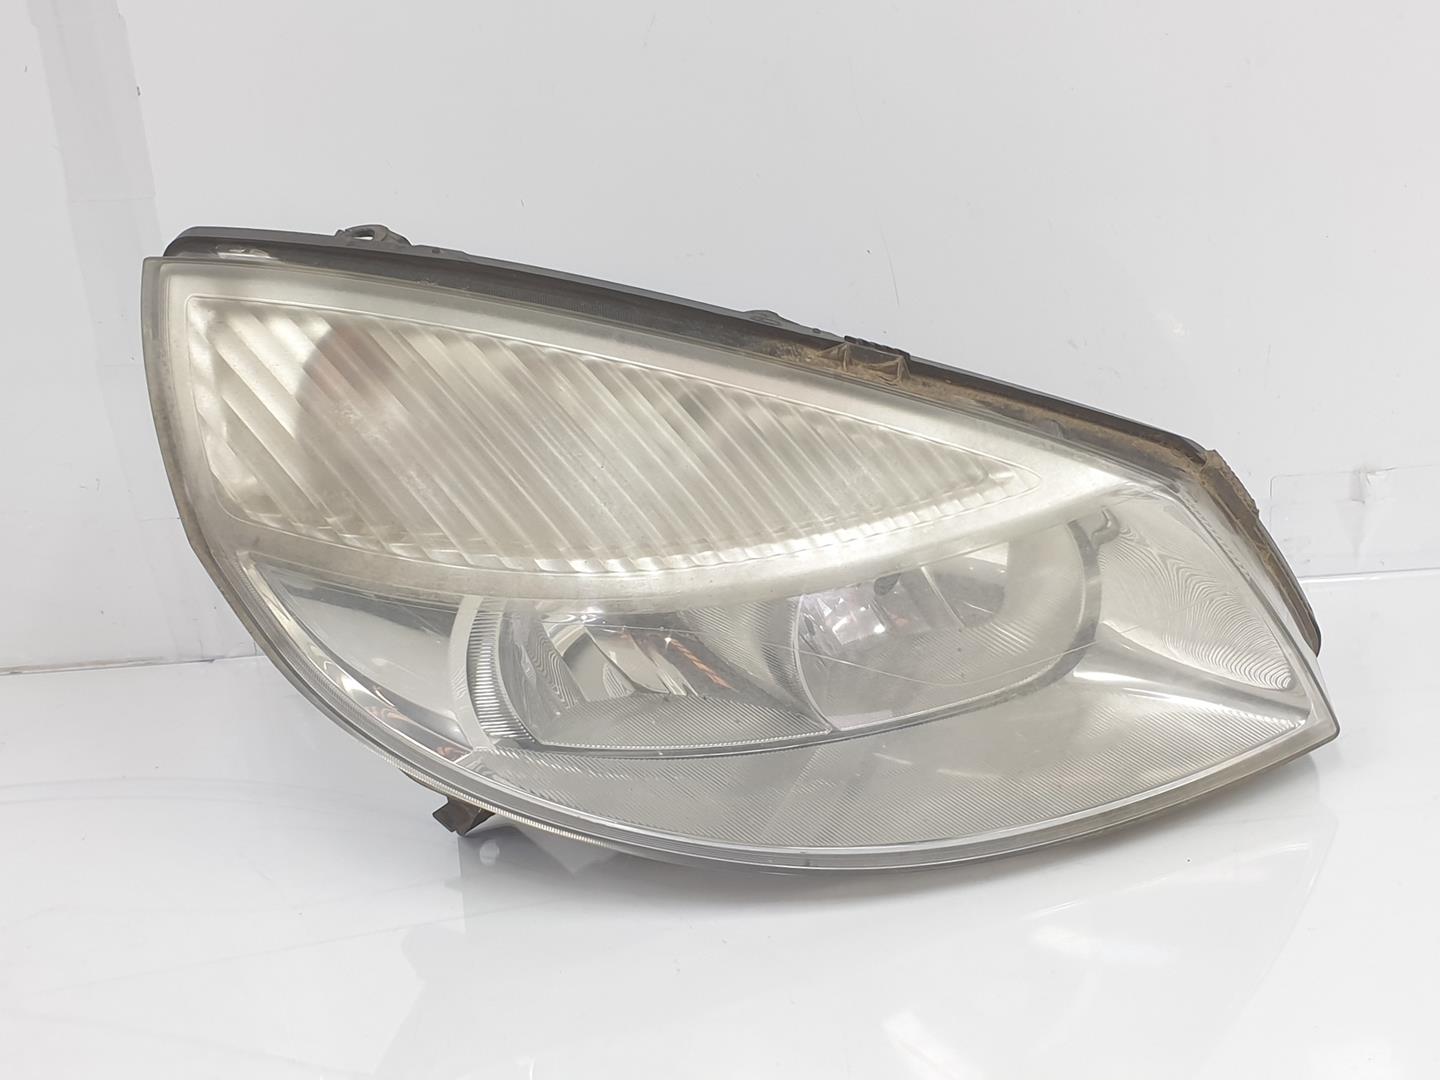 RENAULT Scenic 2 generation (2003-2010) Front Right Headlight 7701056126, 260102336R 19832765